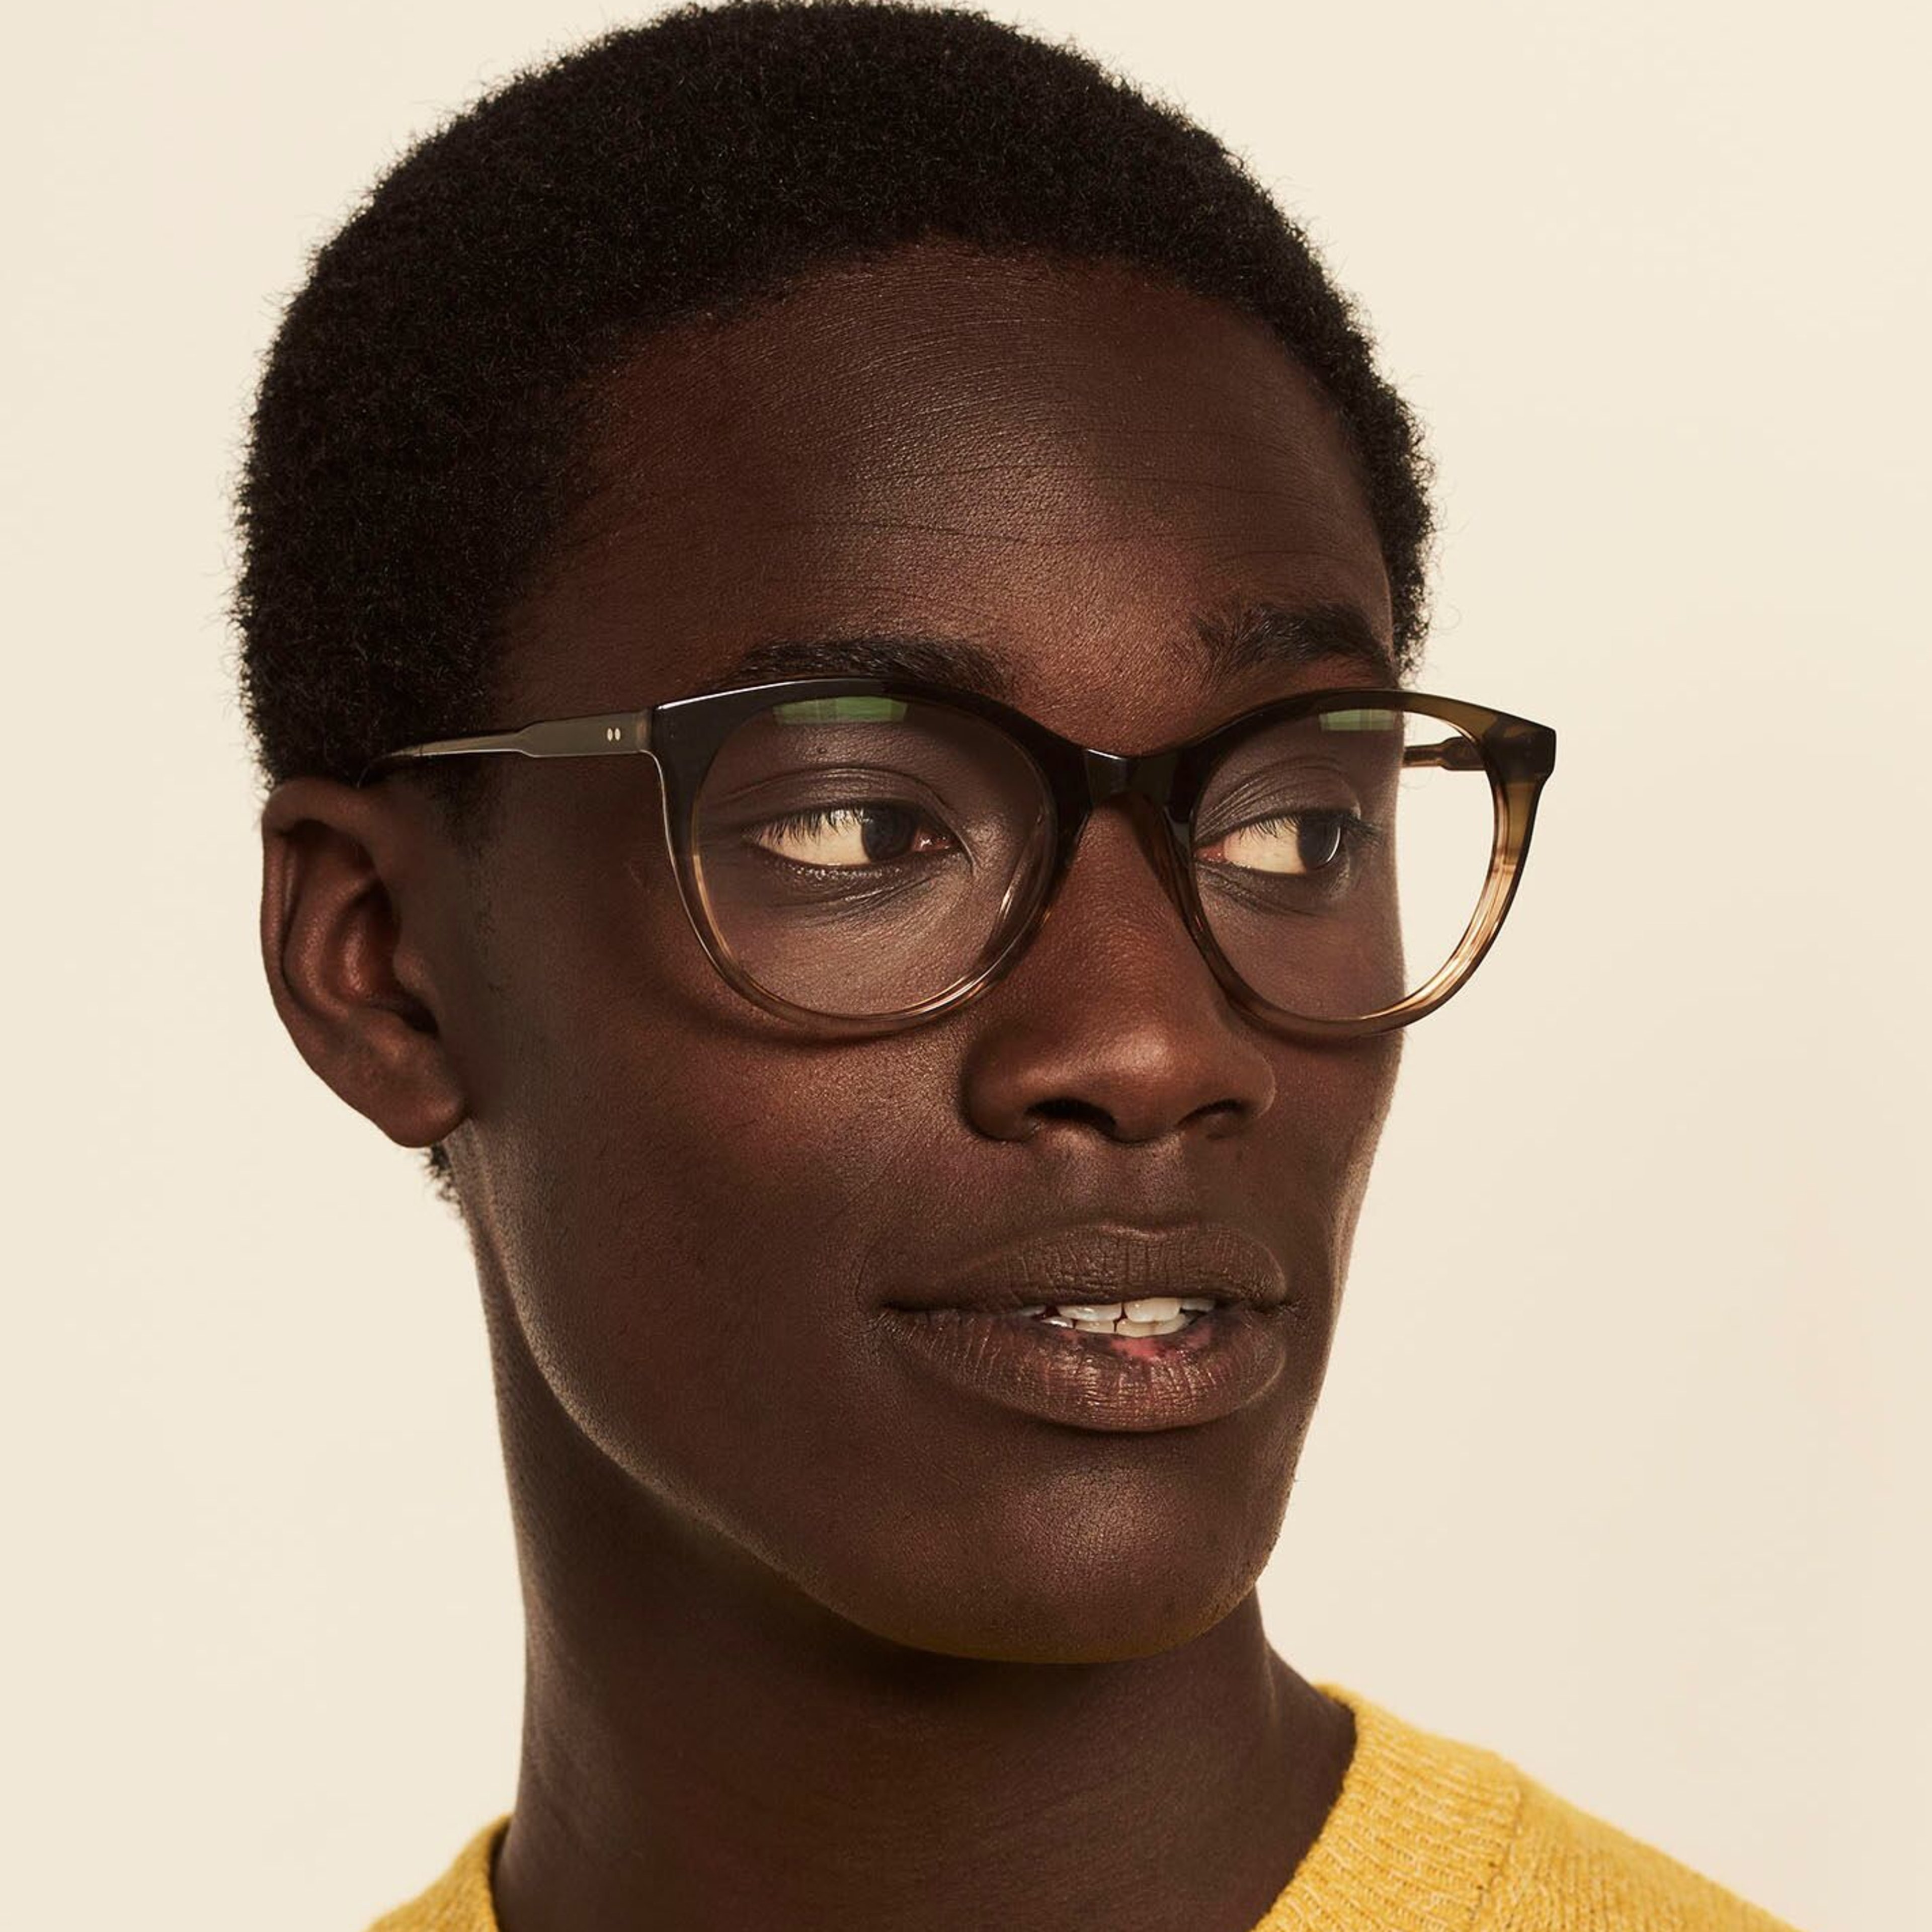 Ace & Tate Glasses | oval Acetate in Brown, Green